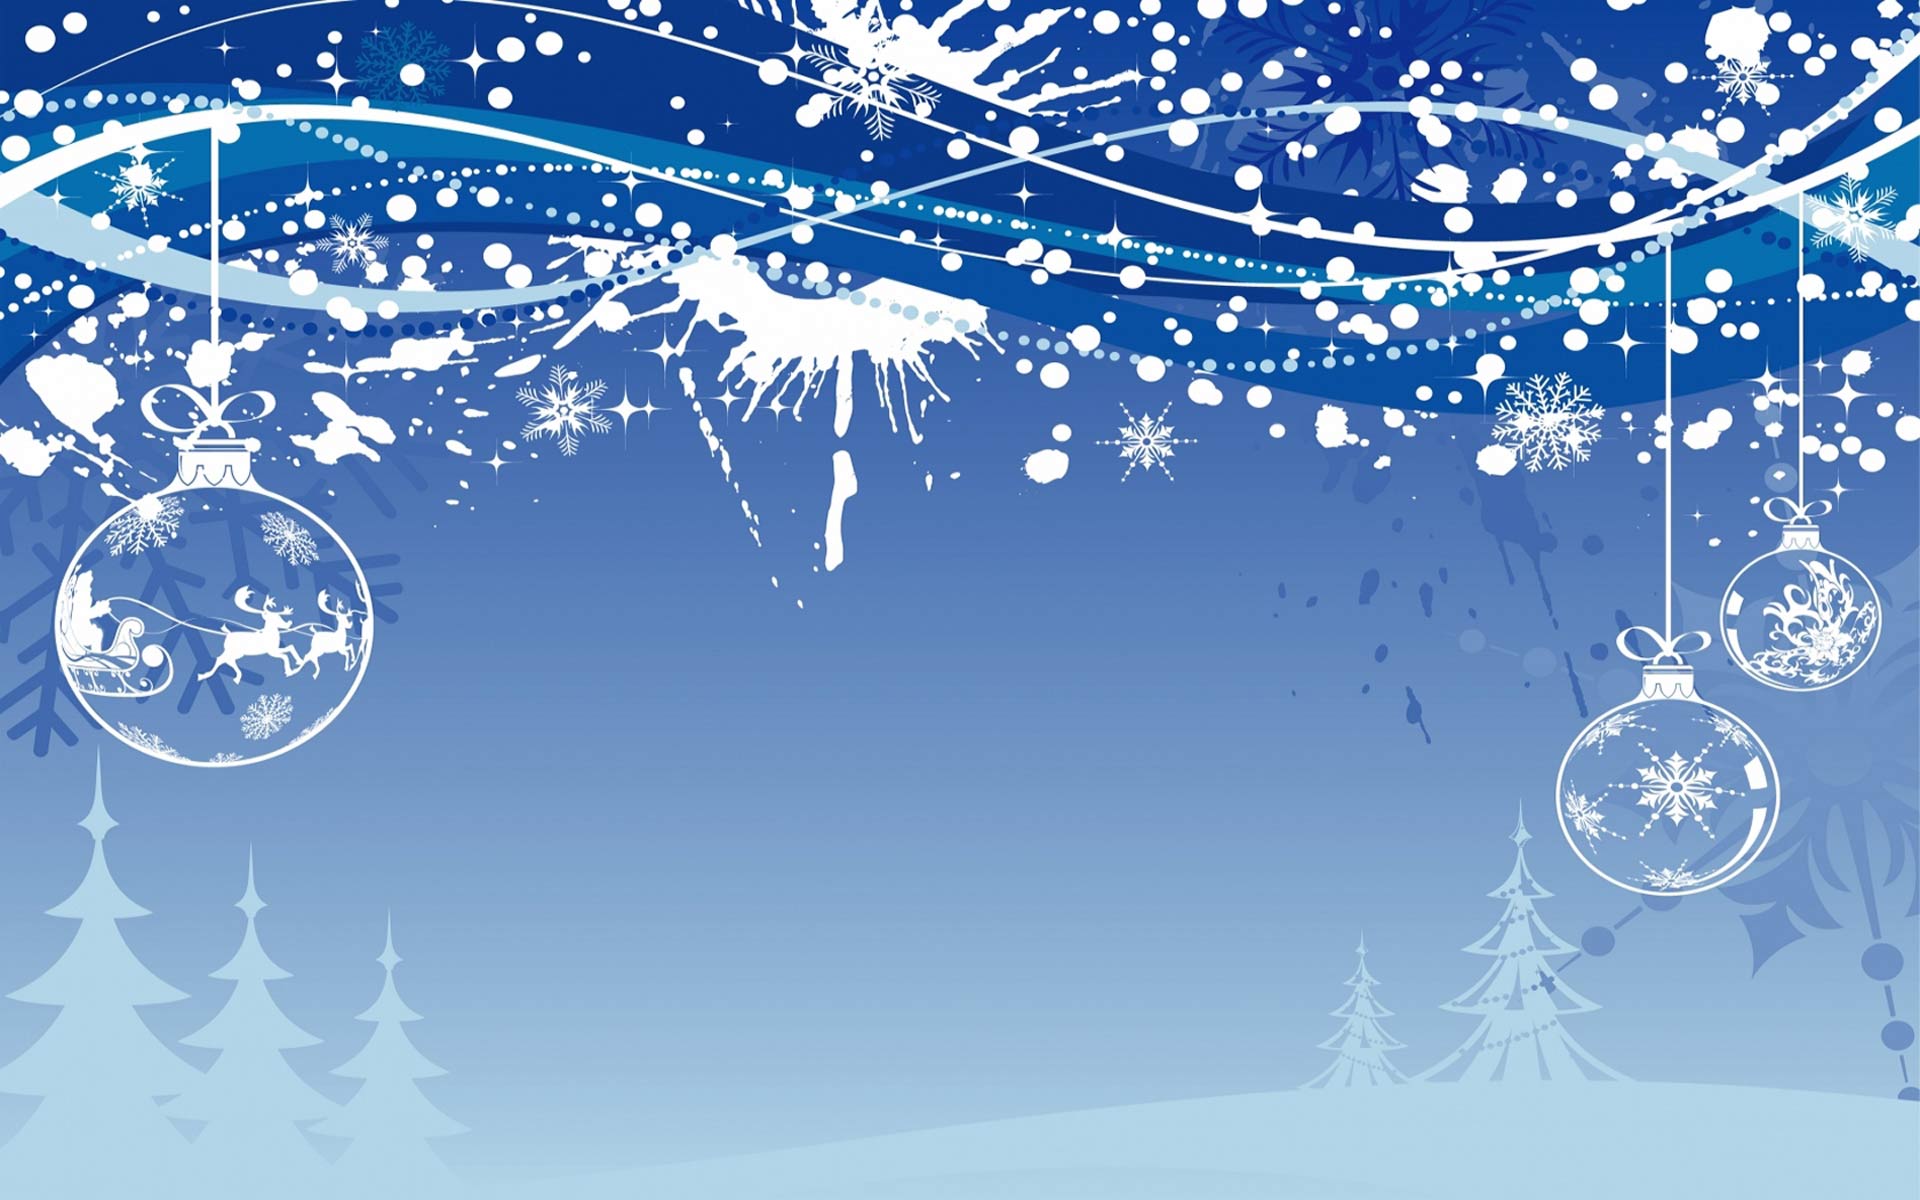 Widescreen Christmas Wallpaper To Have Logic Of Count